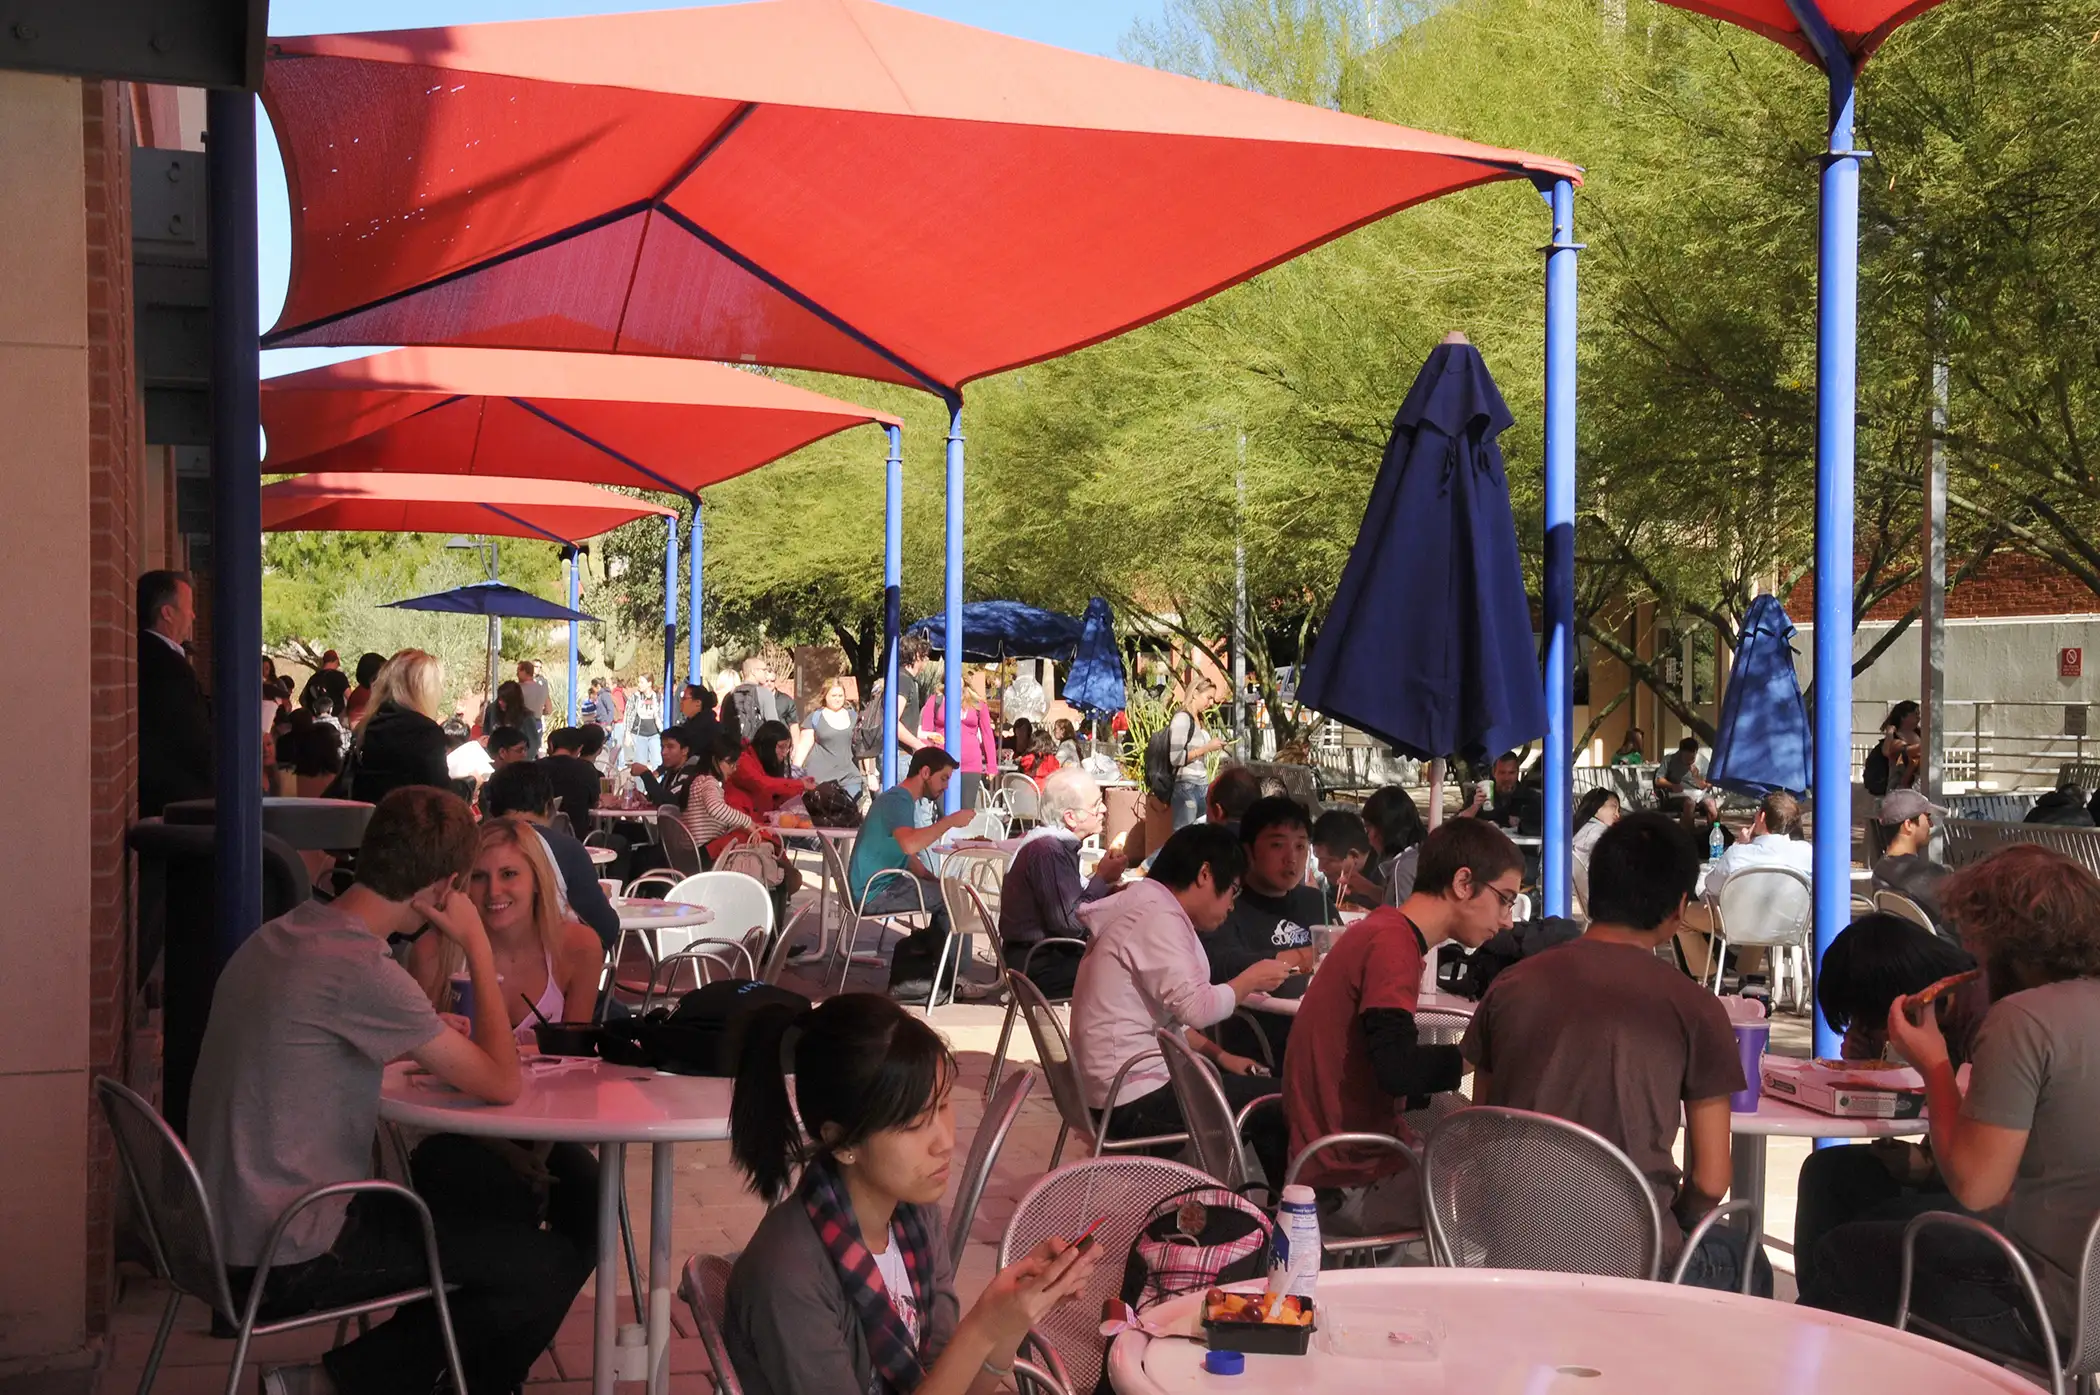 College students eating lunch at the University of Arizona in Tucson